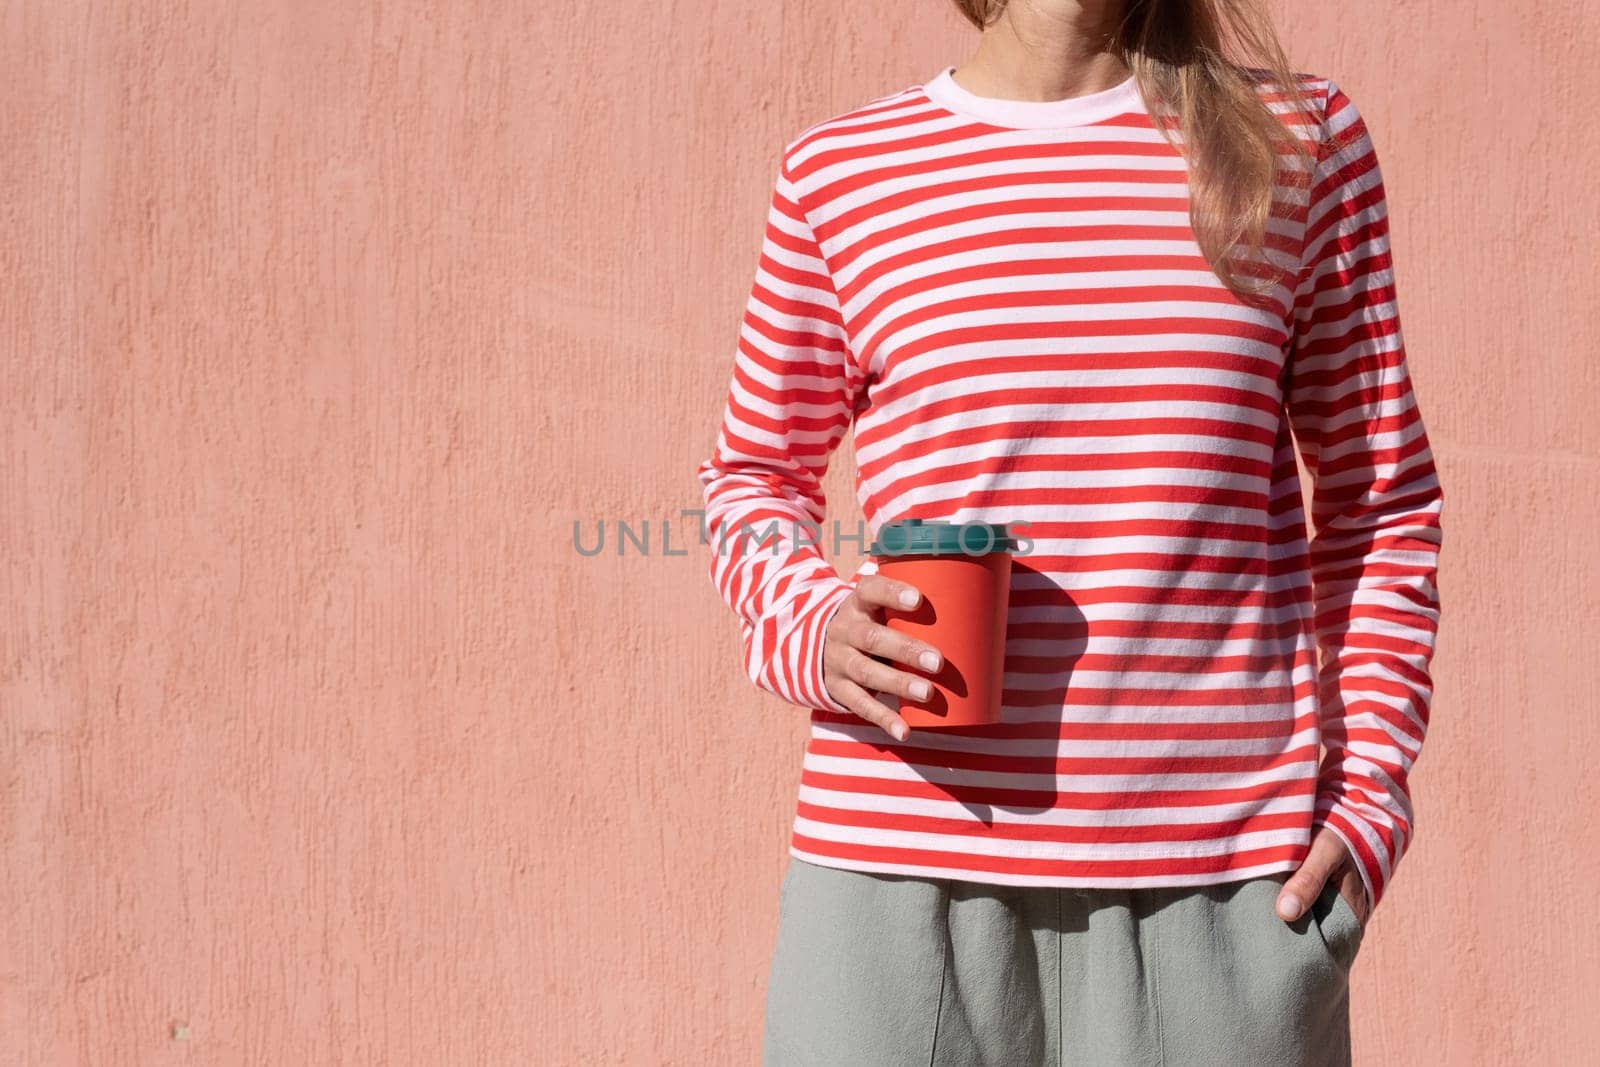 Woman in striped shirt holding red cup and drinking coffee. Close up hand with paper cup.